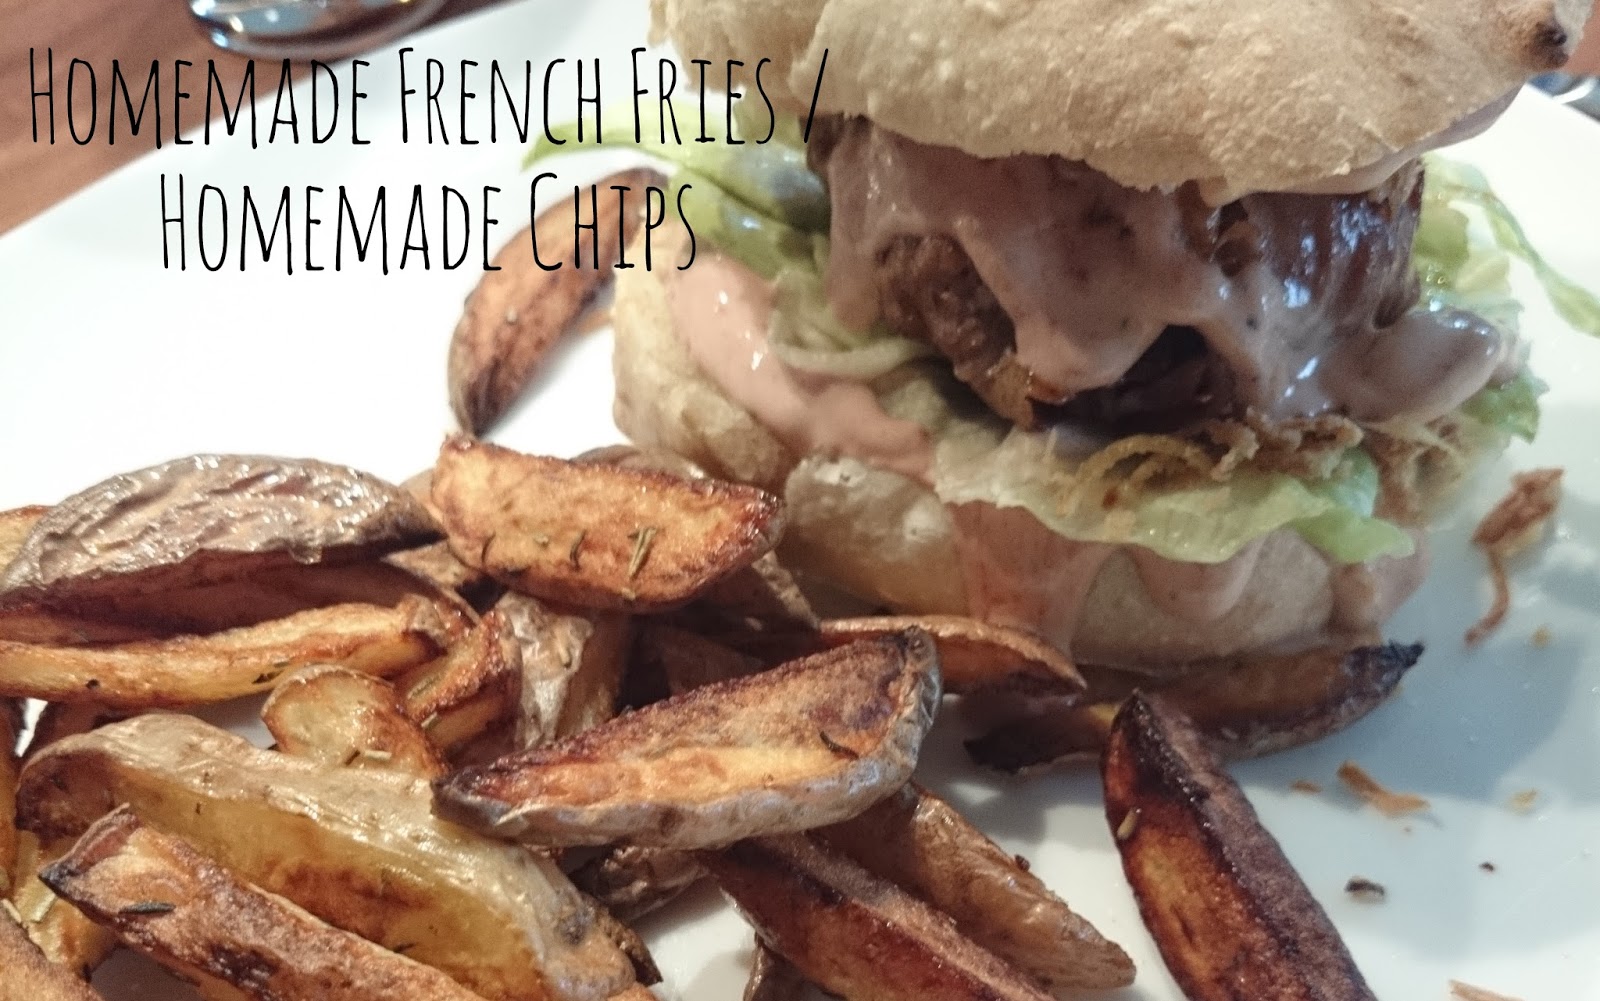 Homemade French Fries / Homemade Chips without fryer